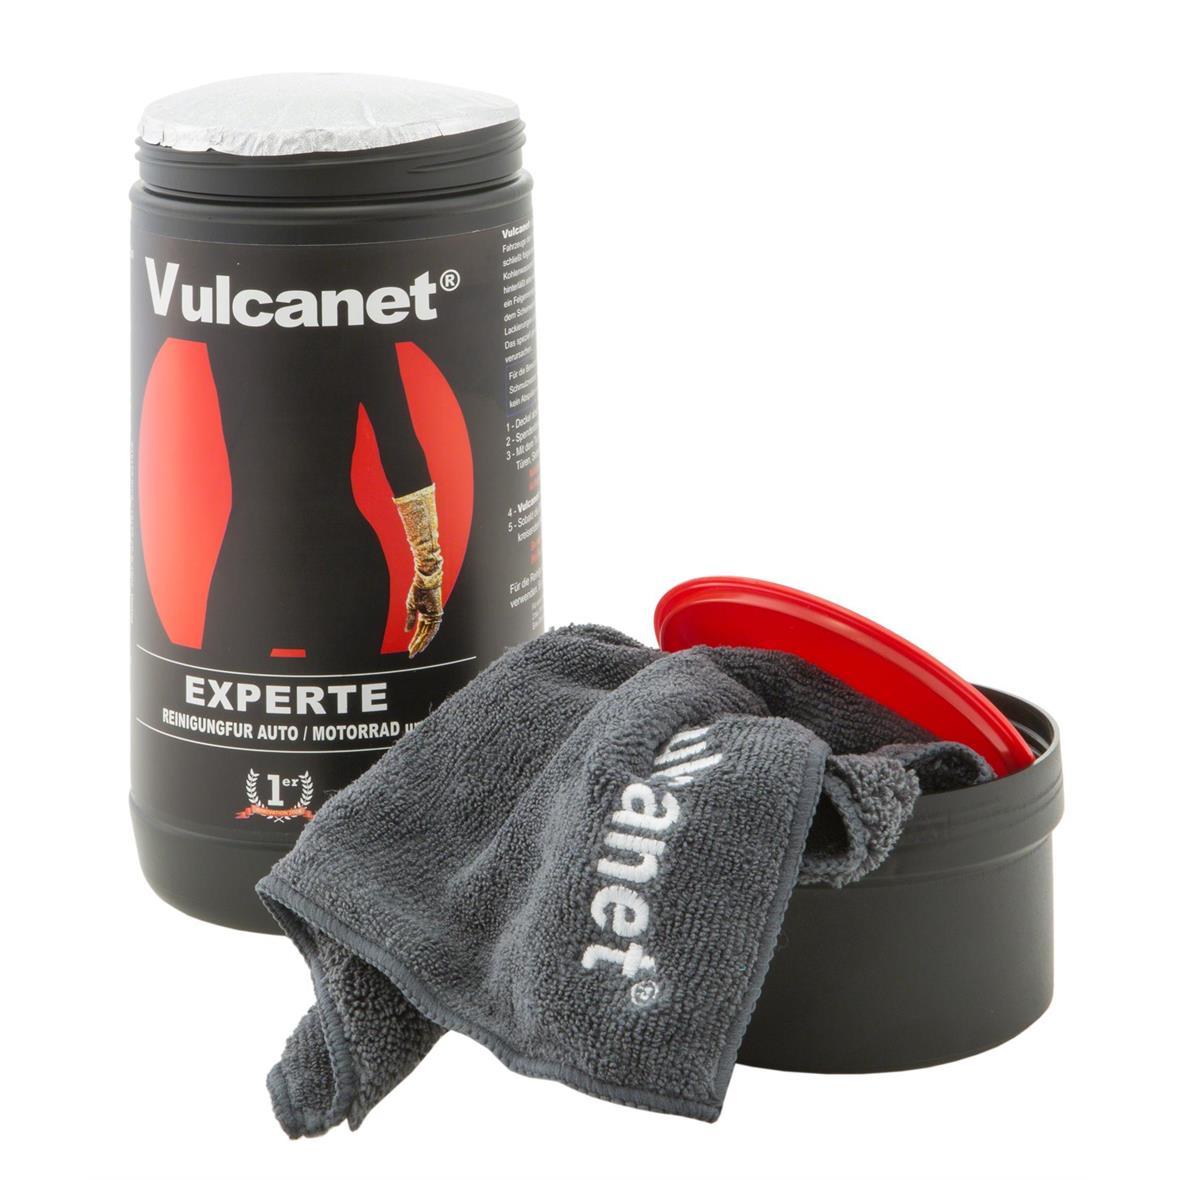 Vulcanet Motorcycle Car Cleaning Wipes New Waterless Genuine Cleaning System